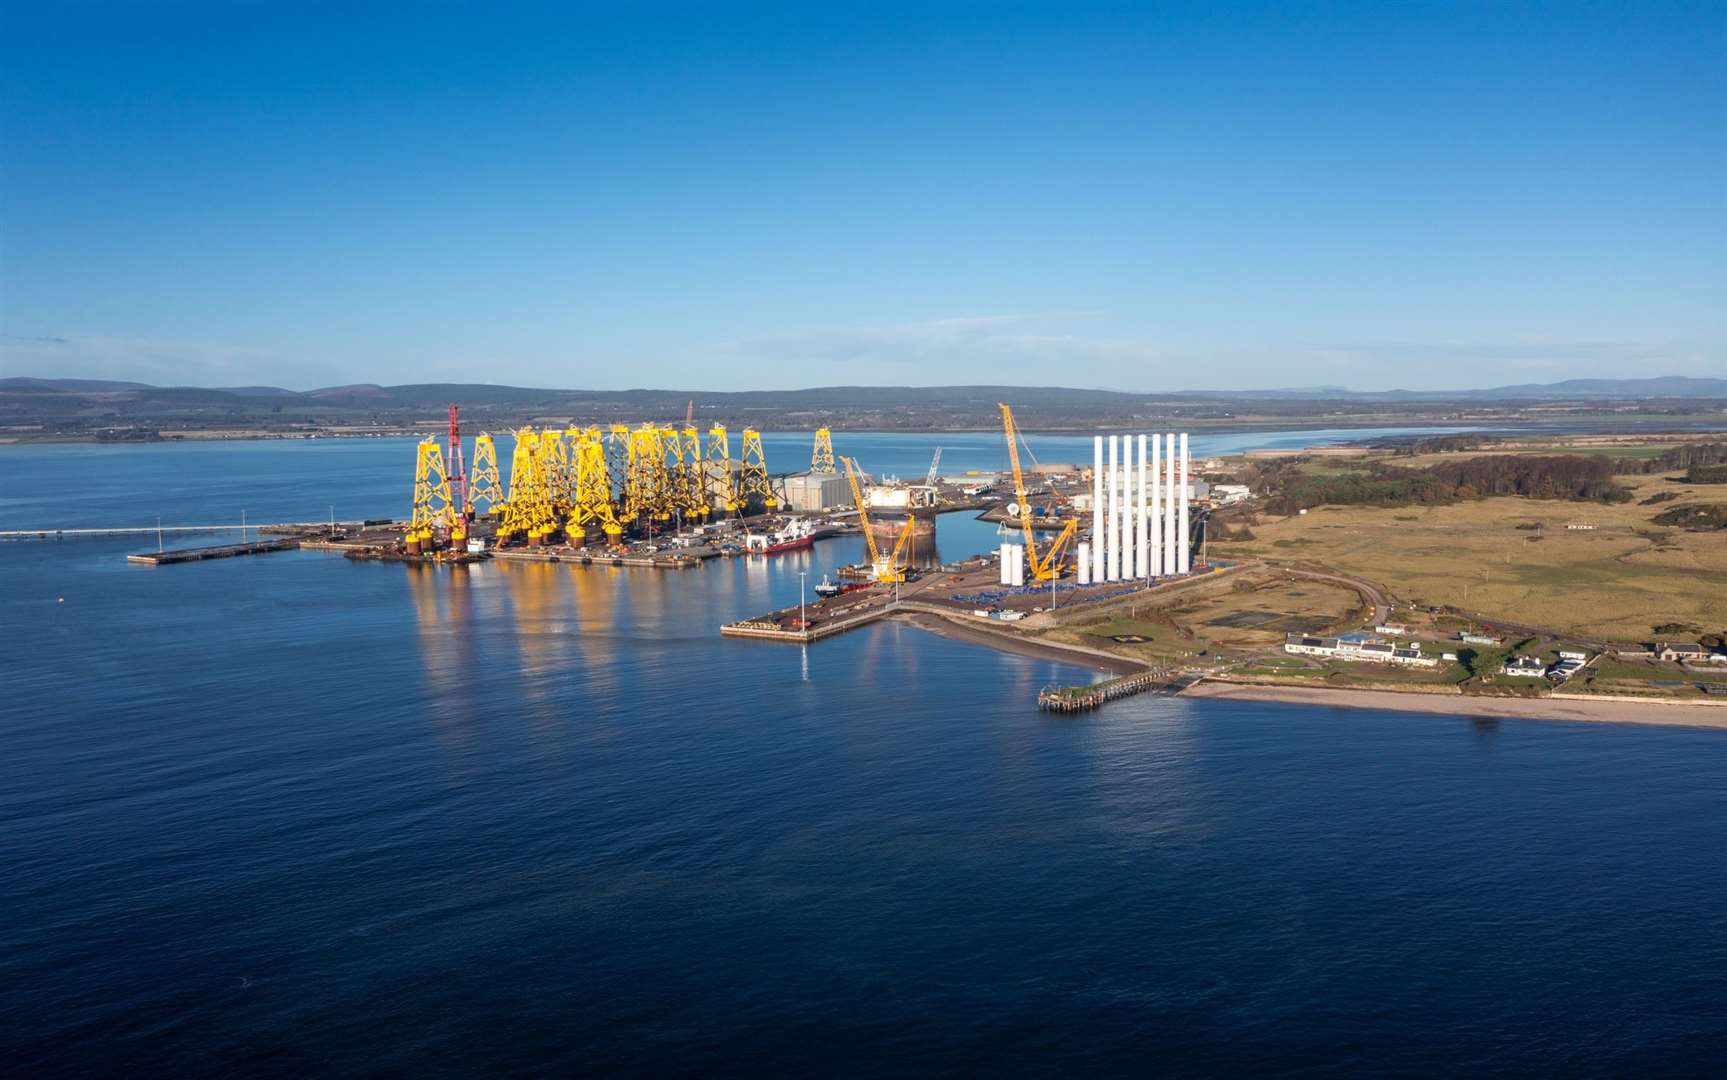 The establishment of special tax sites for Inverness and Cromarty Firth Green Freeport (ICFGF) has been welcomed by business leaders and politicians.